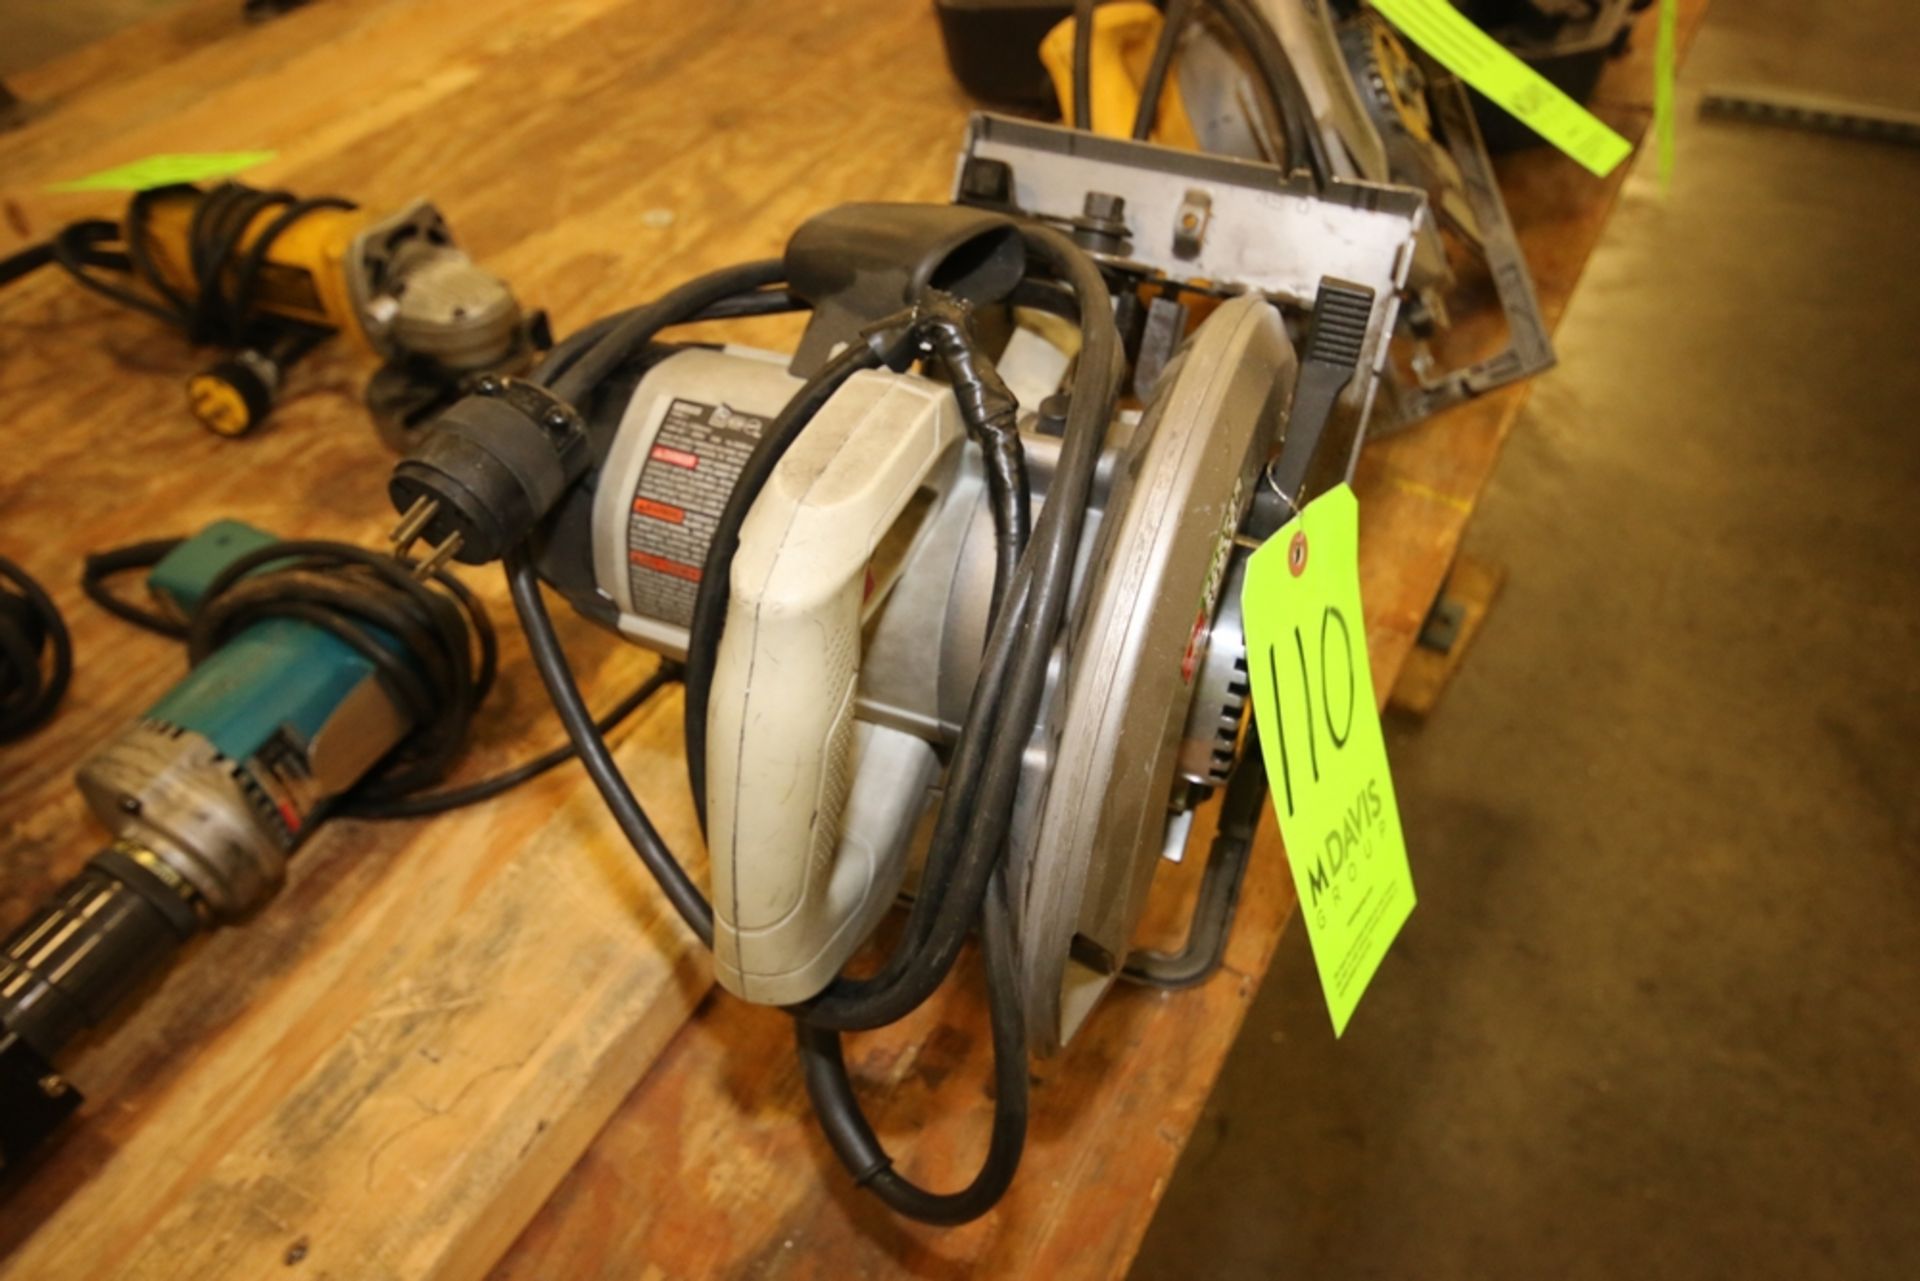 Porter Cable Portable Electric Chain Saw, Type 1, 7-1/4", 120 Volts, with Power Cord - Image 2 of 2